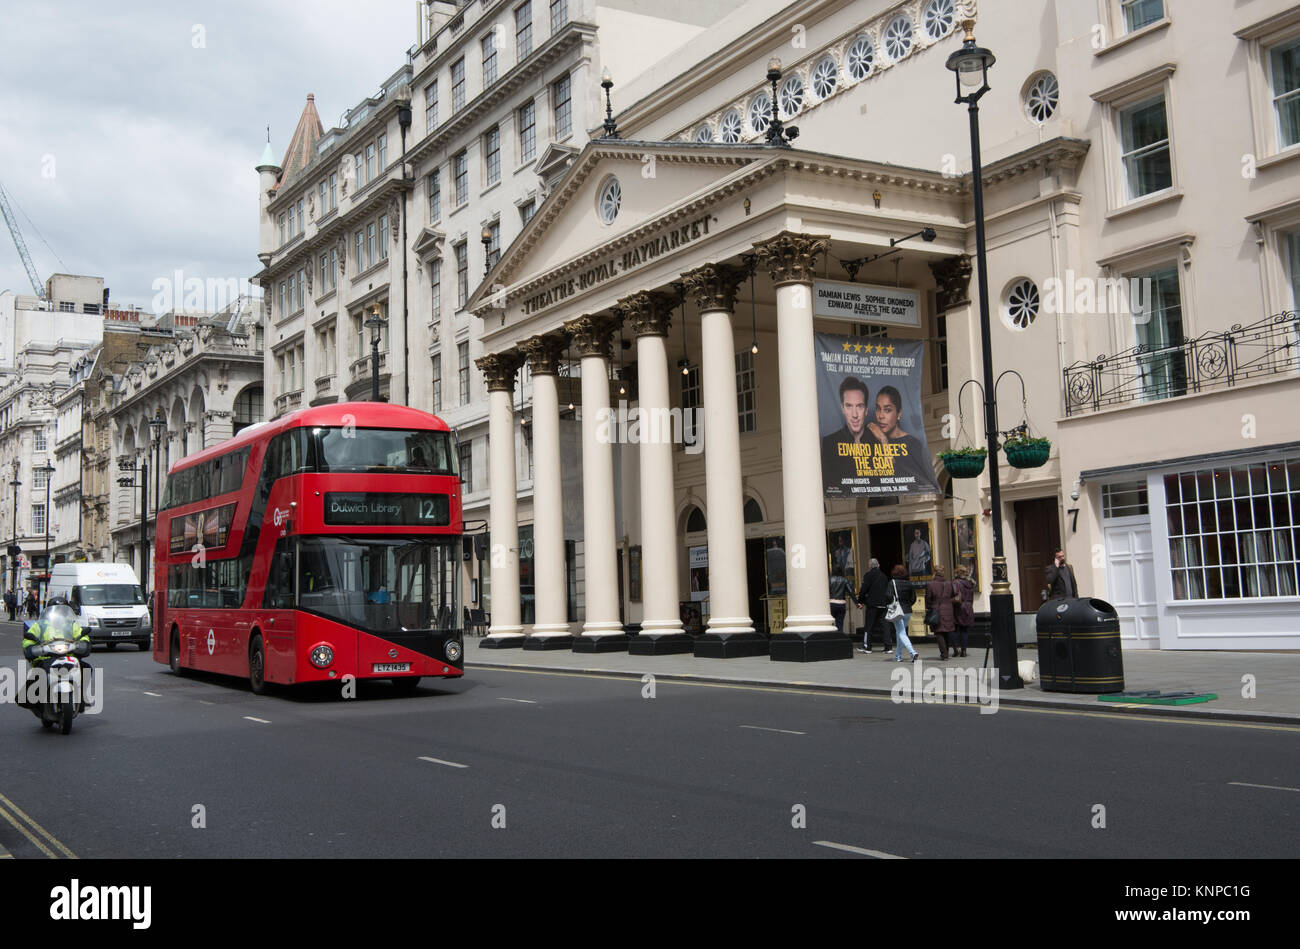 A New Bus for London travels past the Theater Royal Haymarket Stock Photo